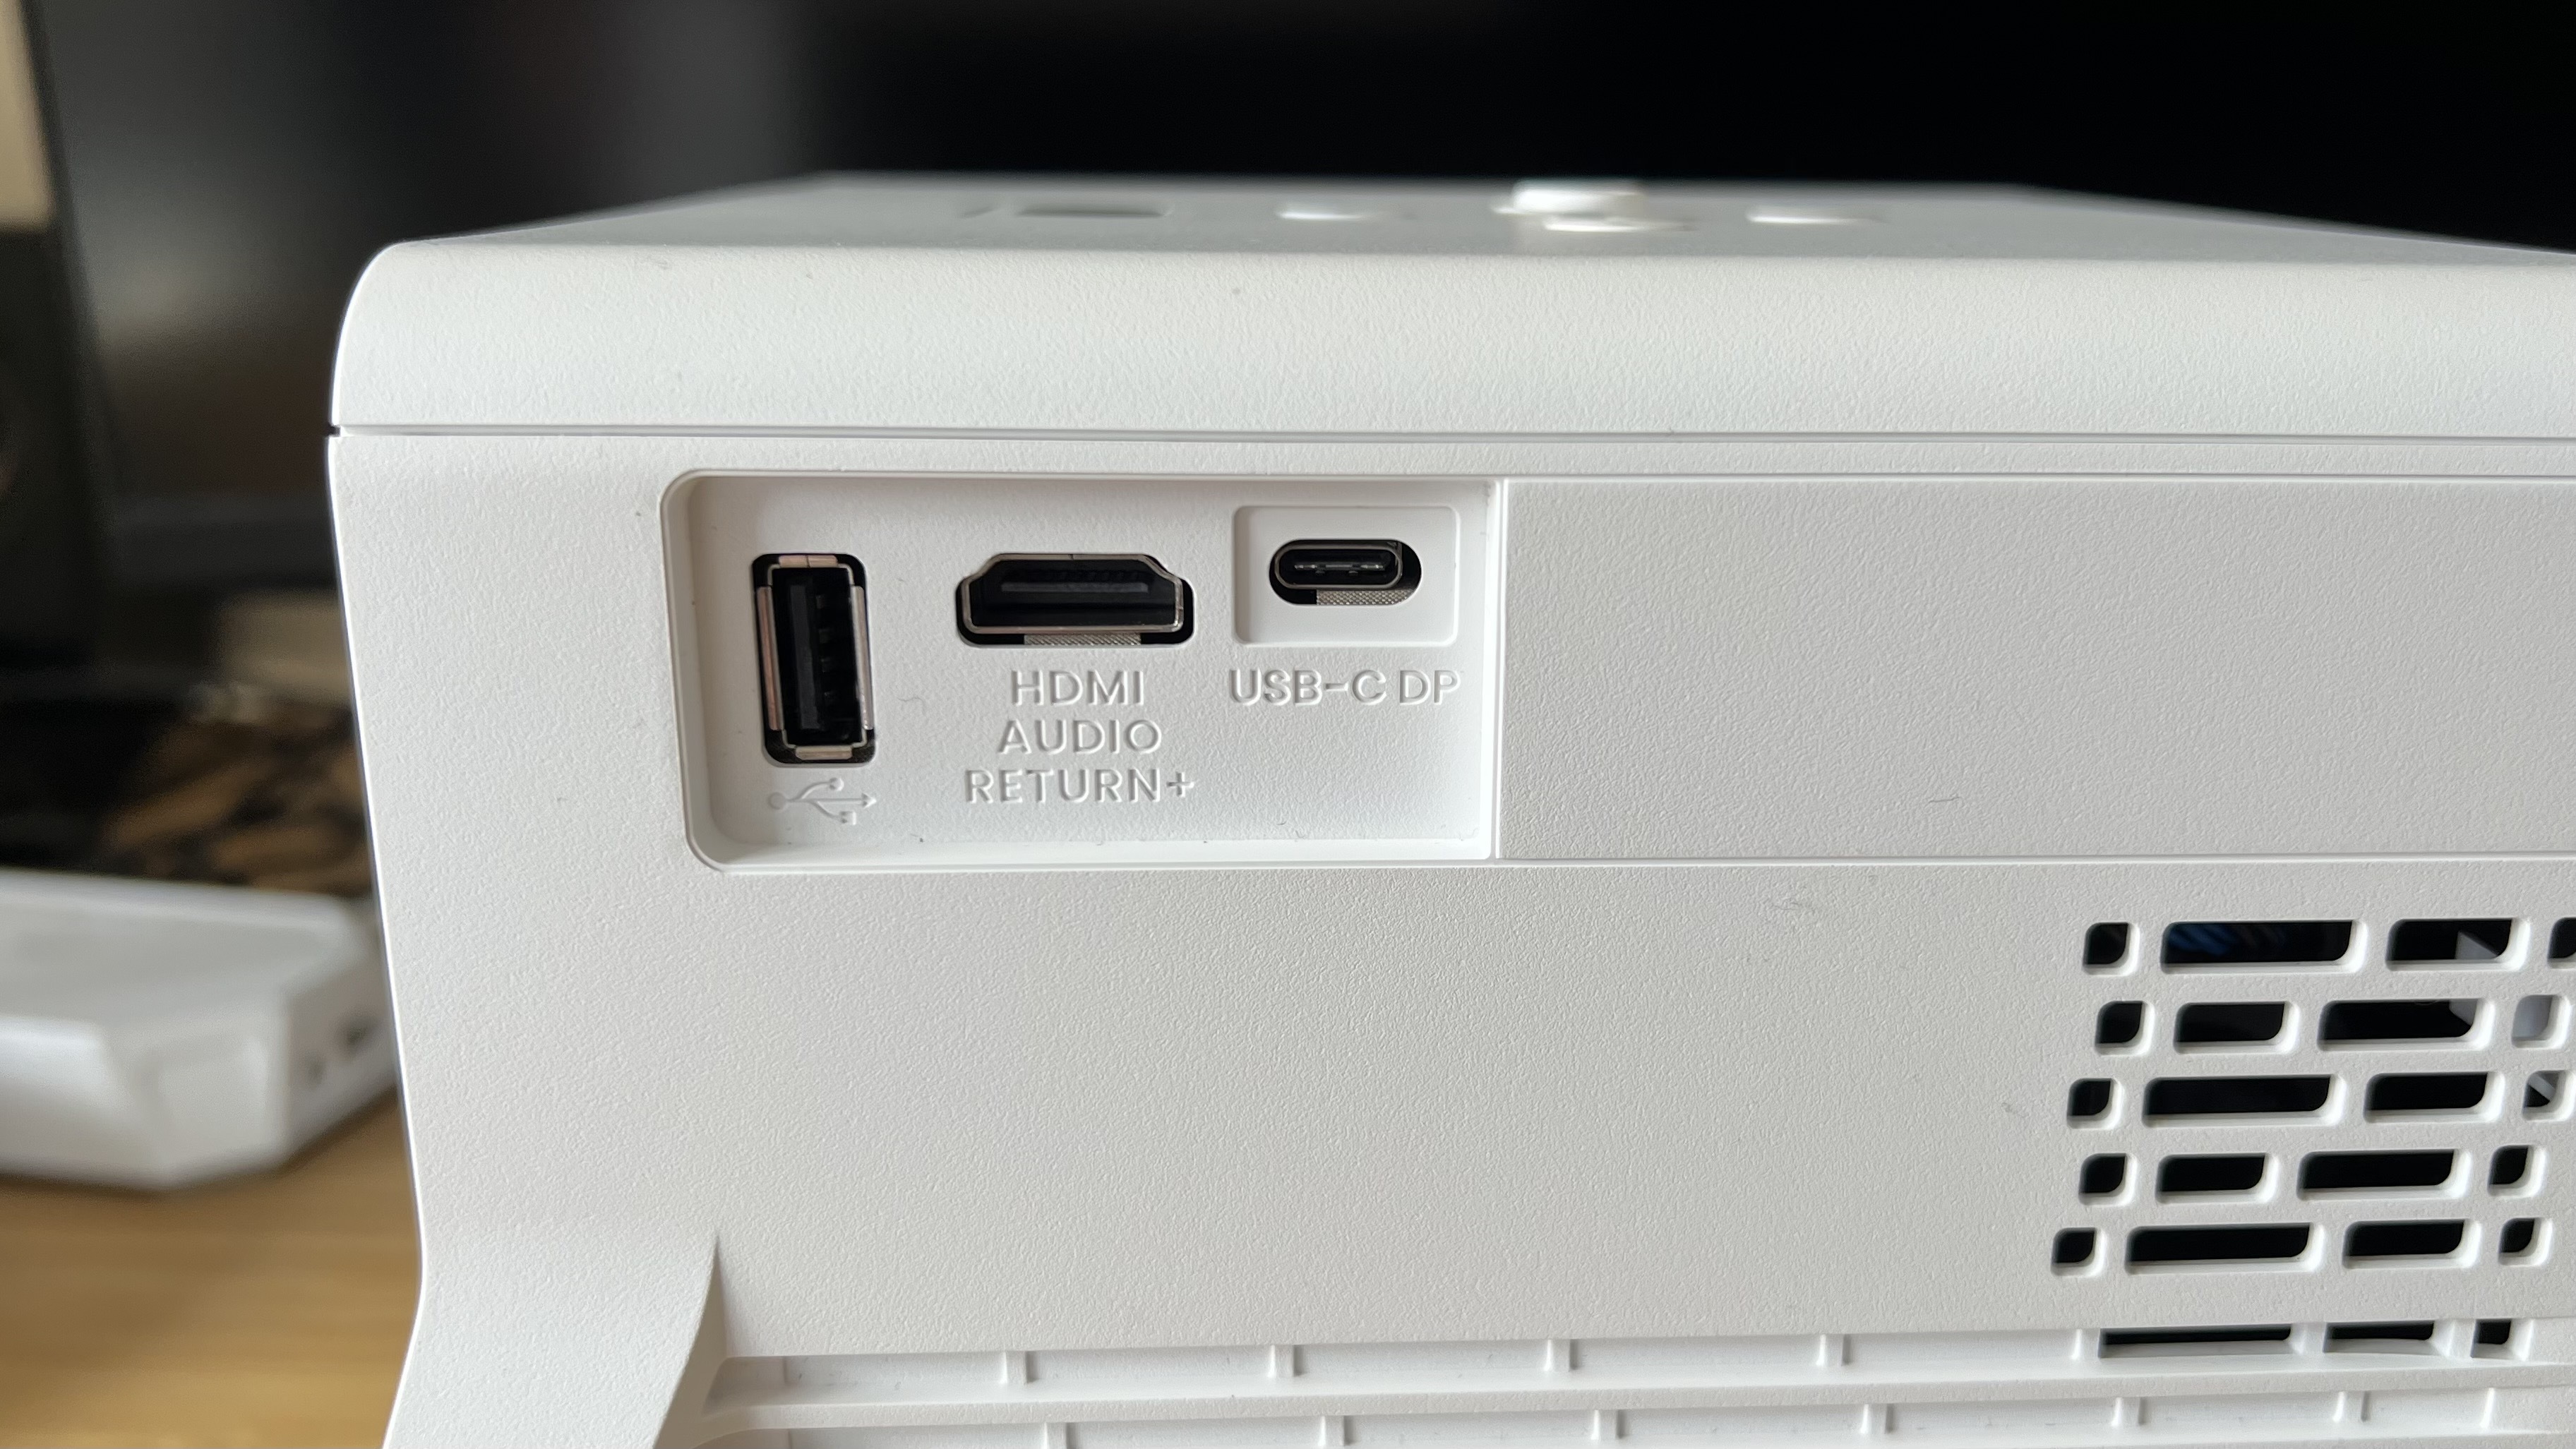 USB, HDMI, and USB-C ports on the side of the BenQ X300G projector